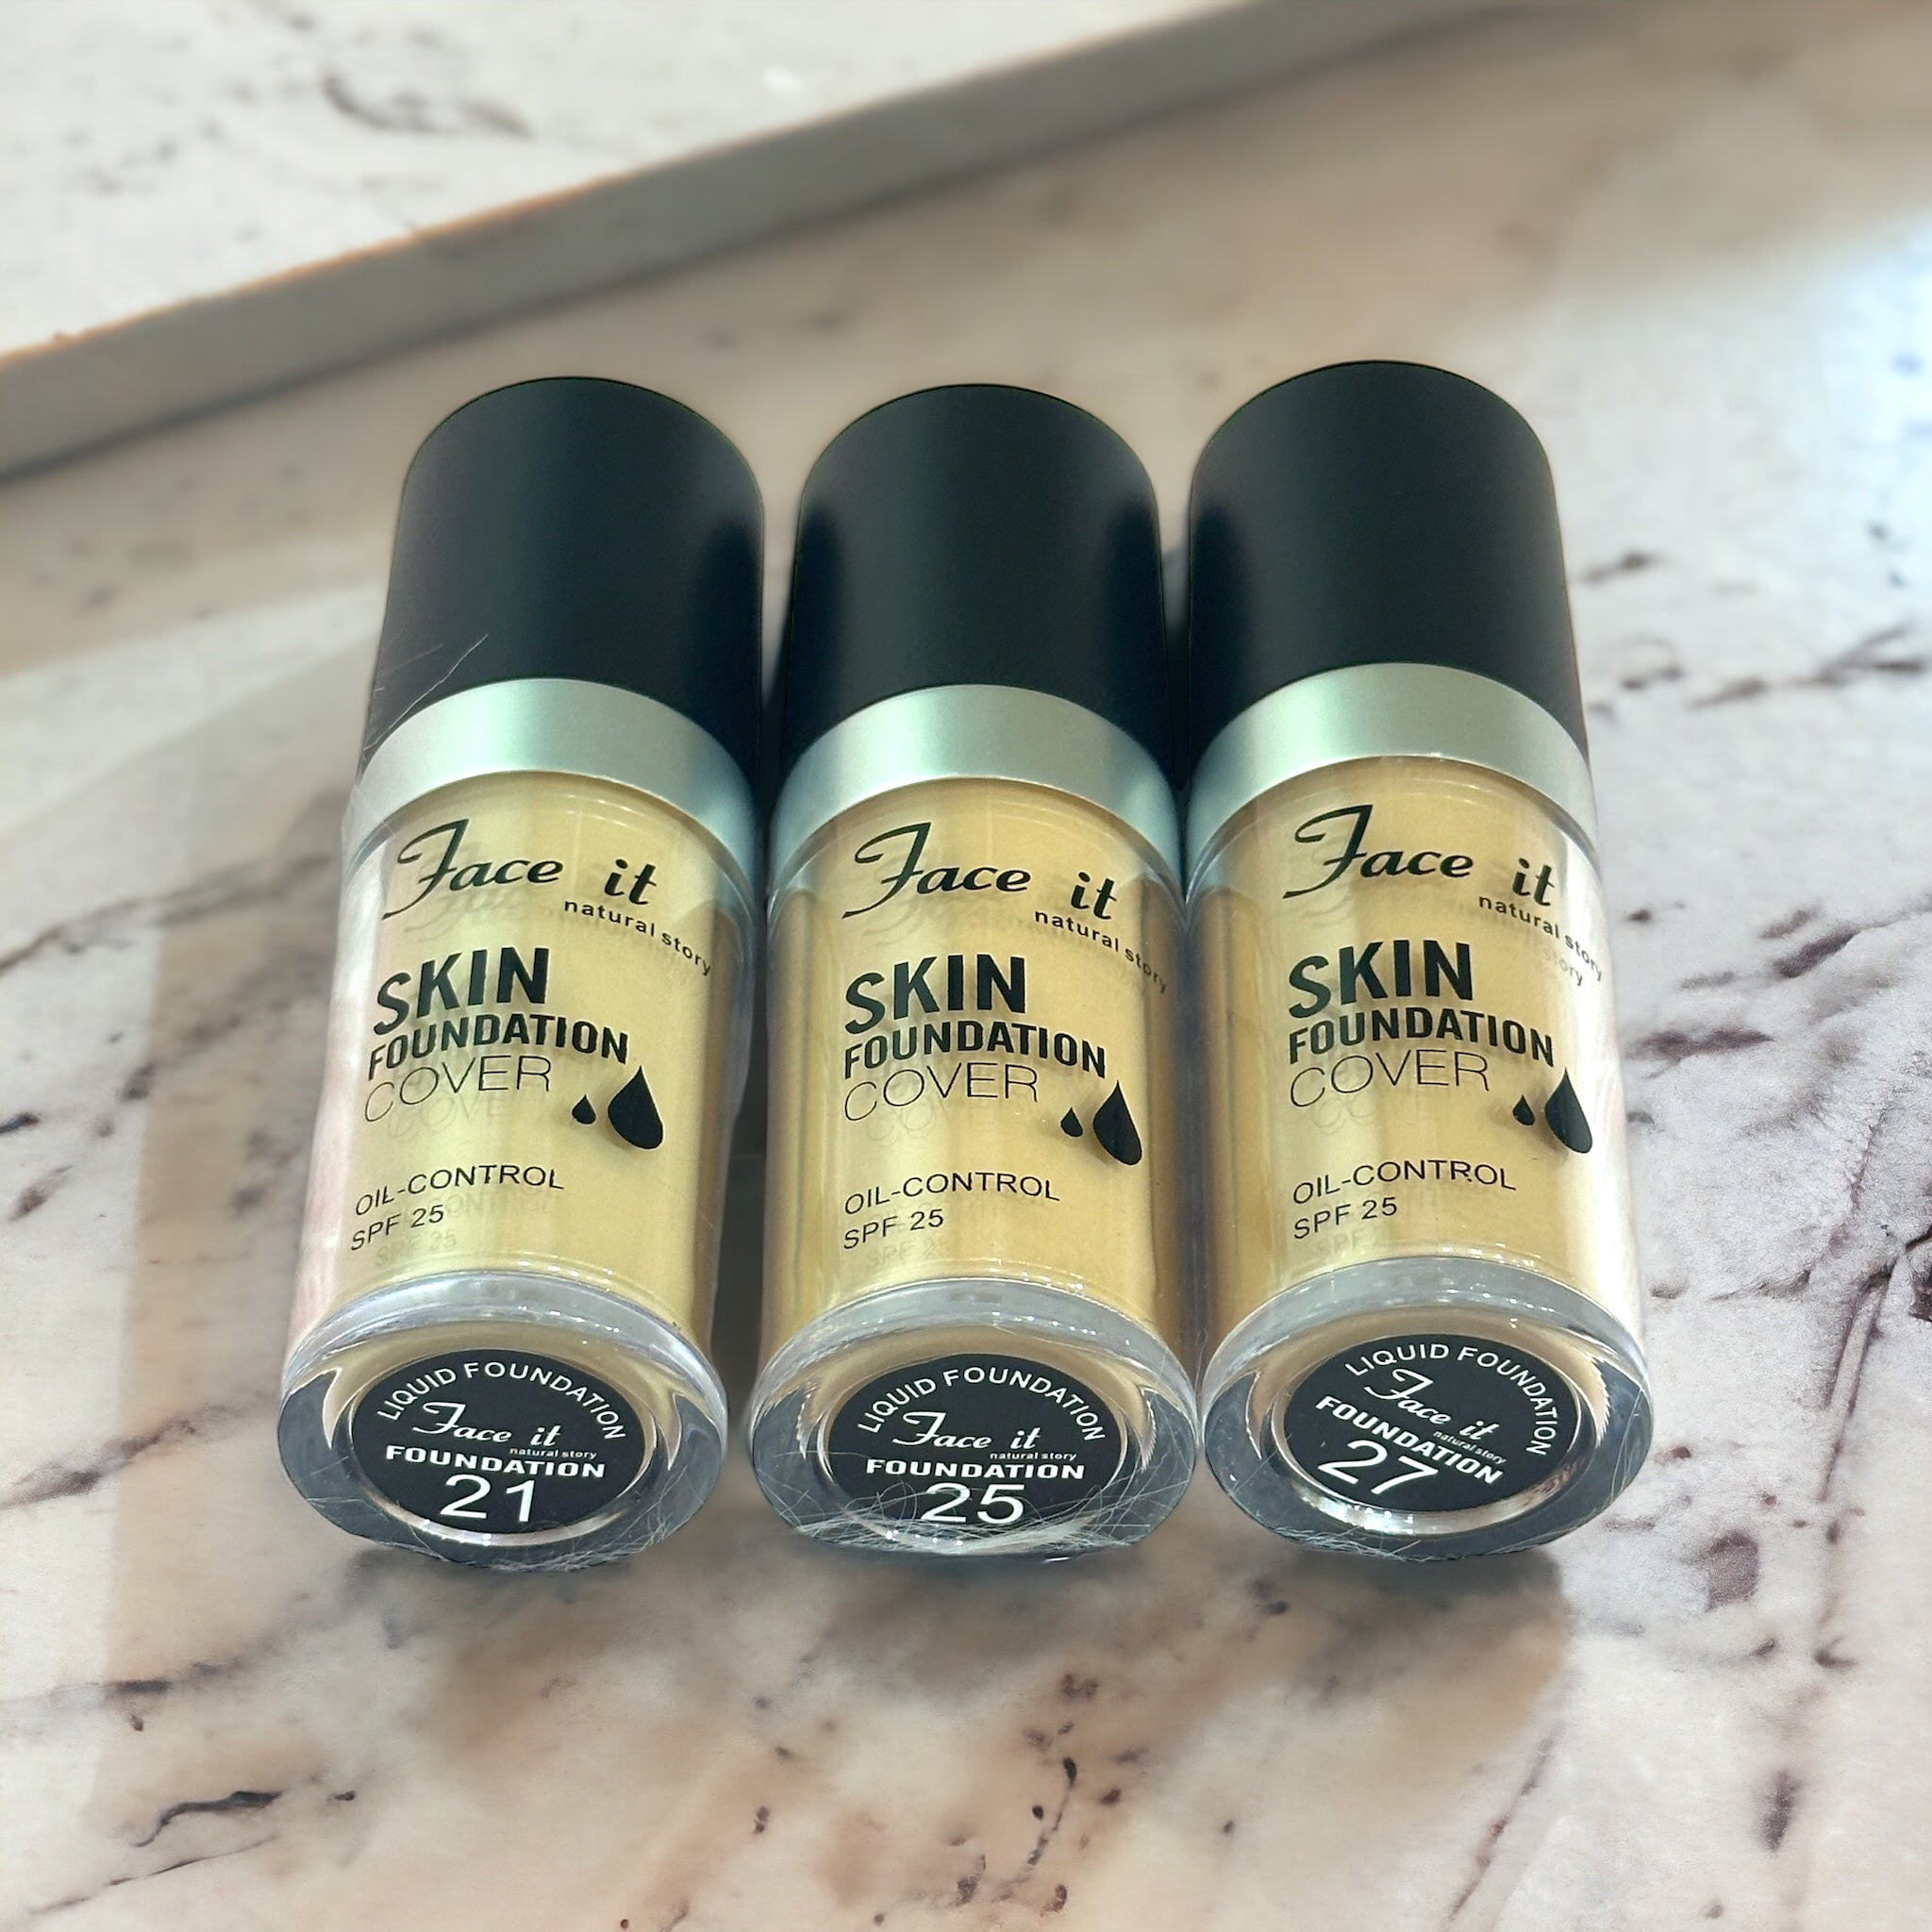 FACE IT SKIN FOUNDATION COVER OIL CONTROL